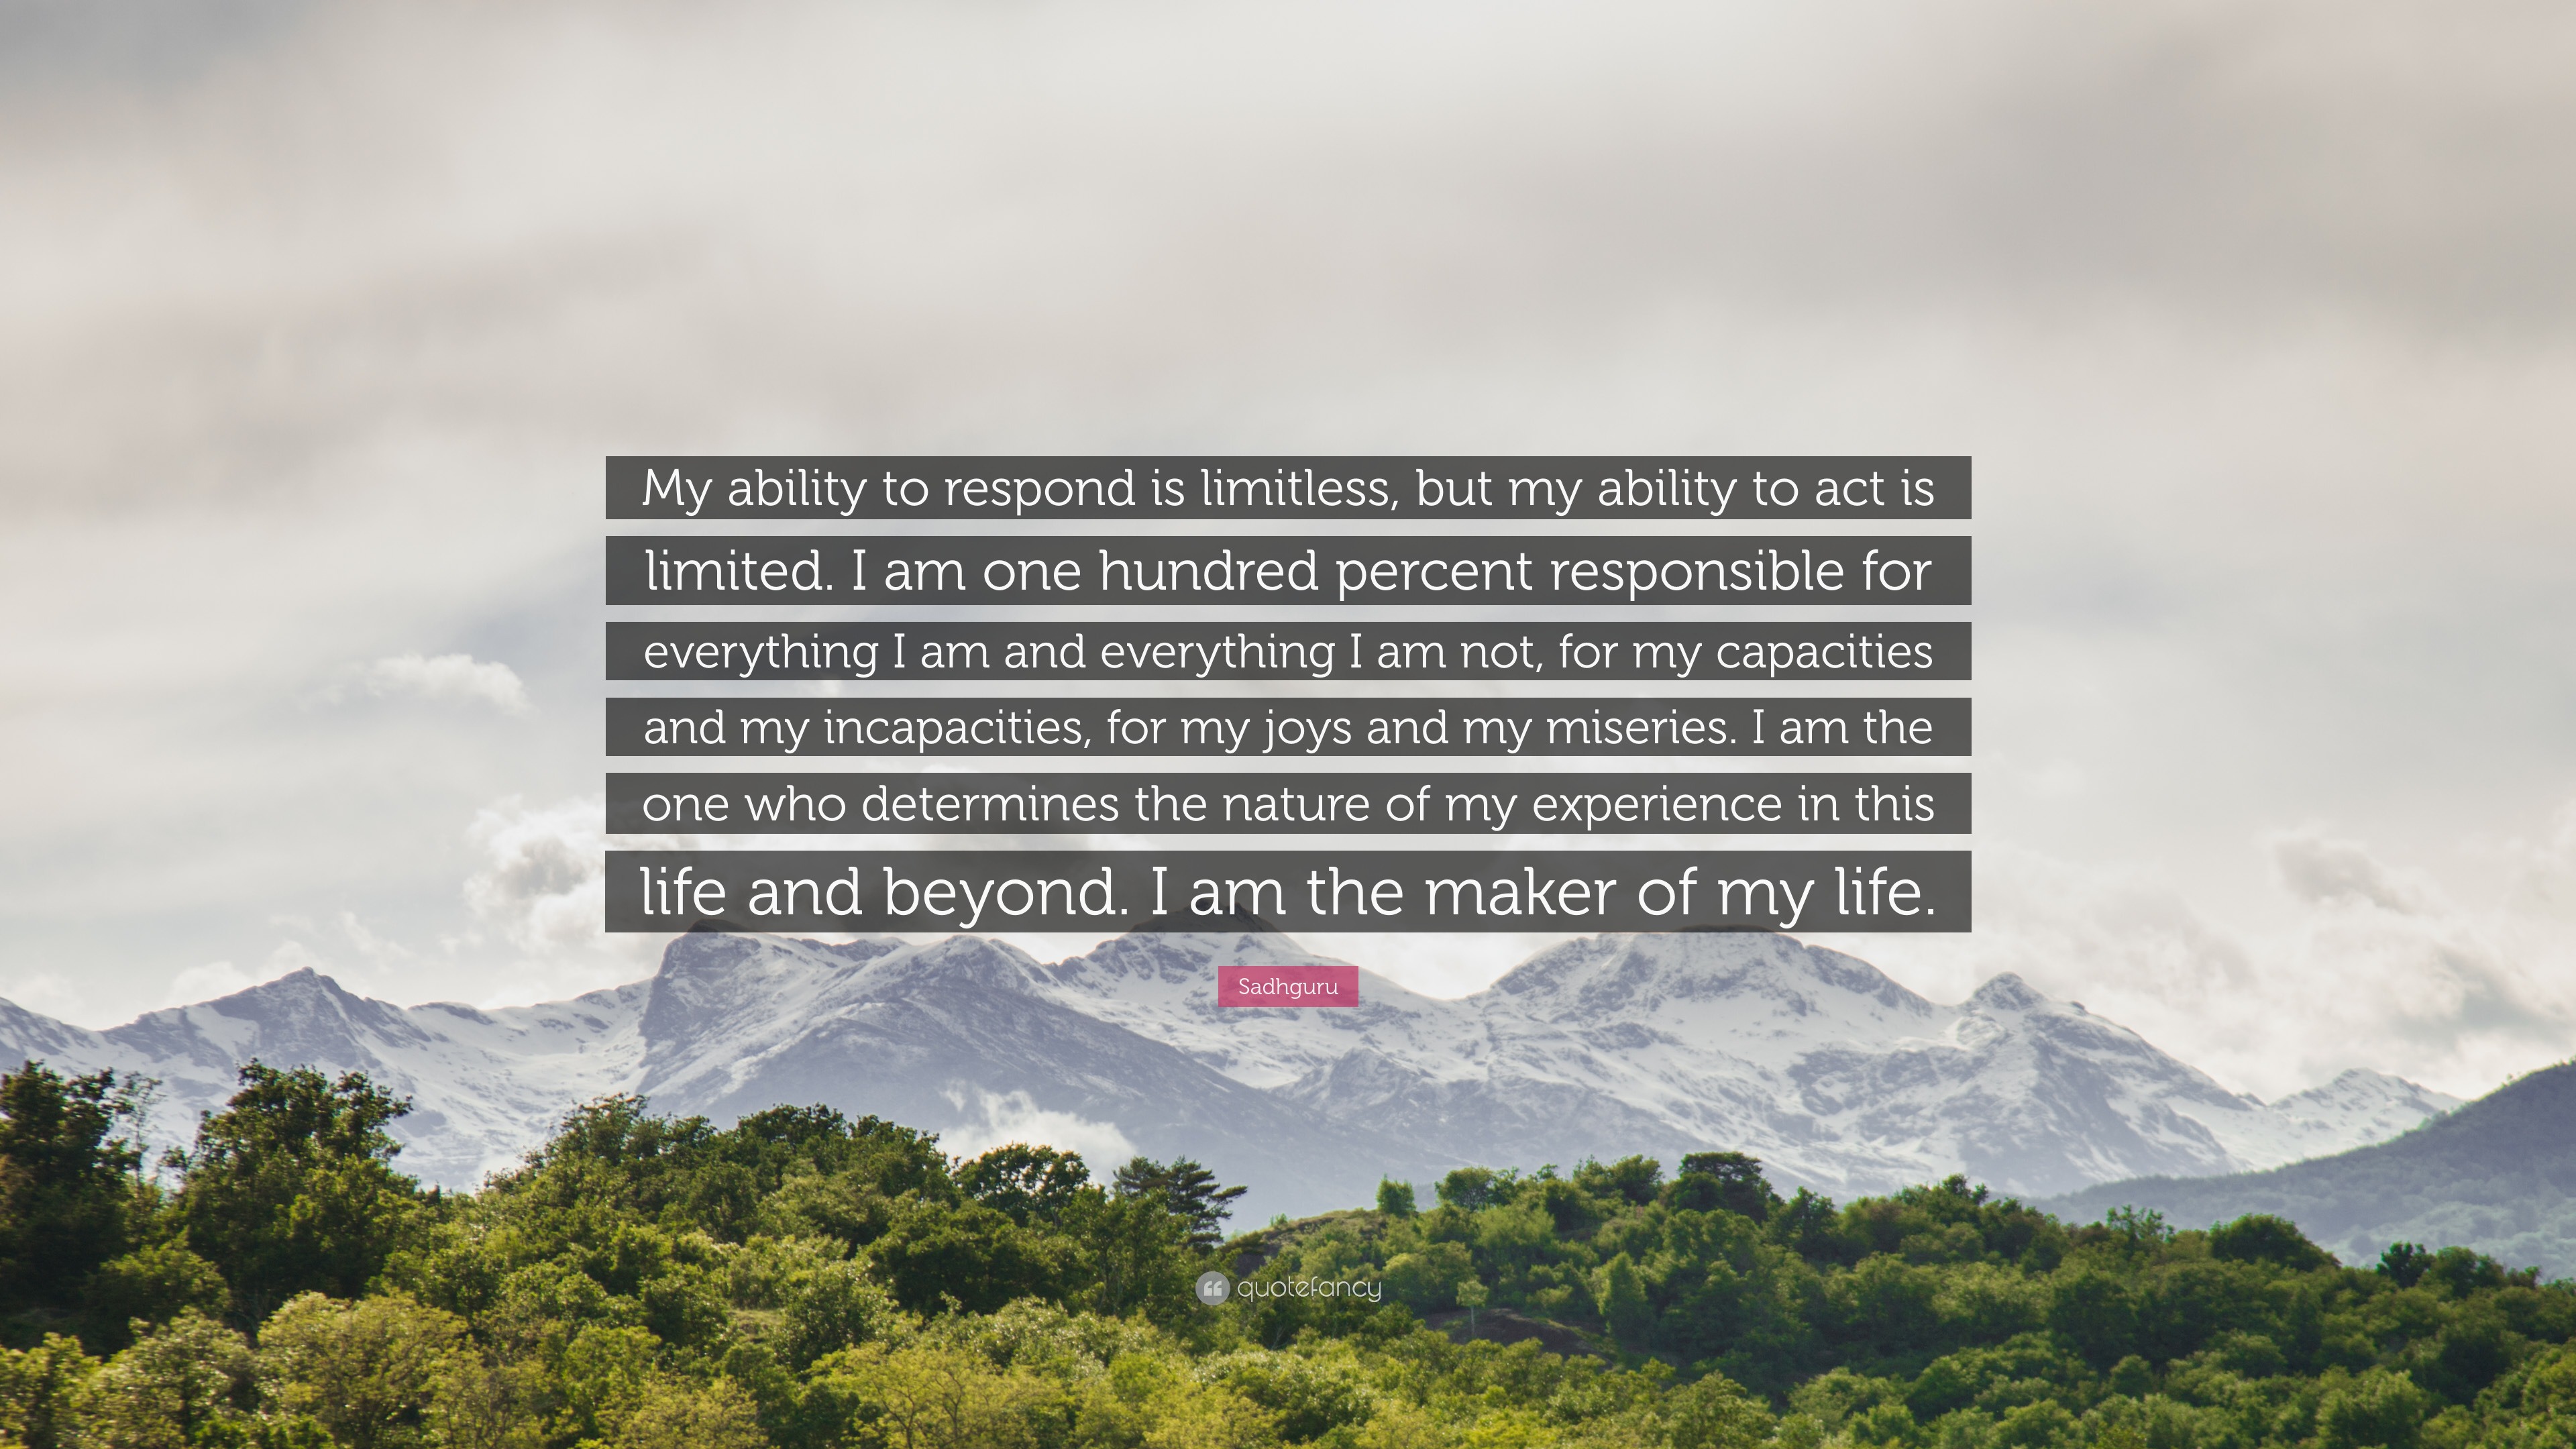 Sadhguru Quote: “My ability to respond is limitless, but my ability to act  is limited. I am one hundred percent responsible for everythin...”